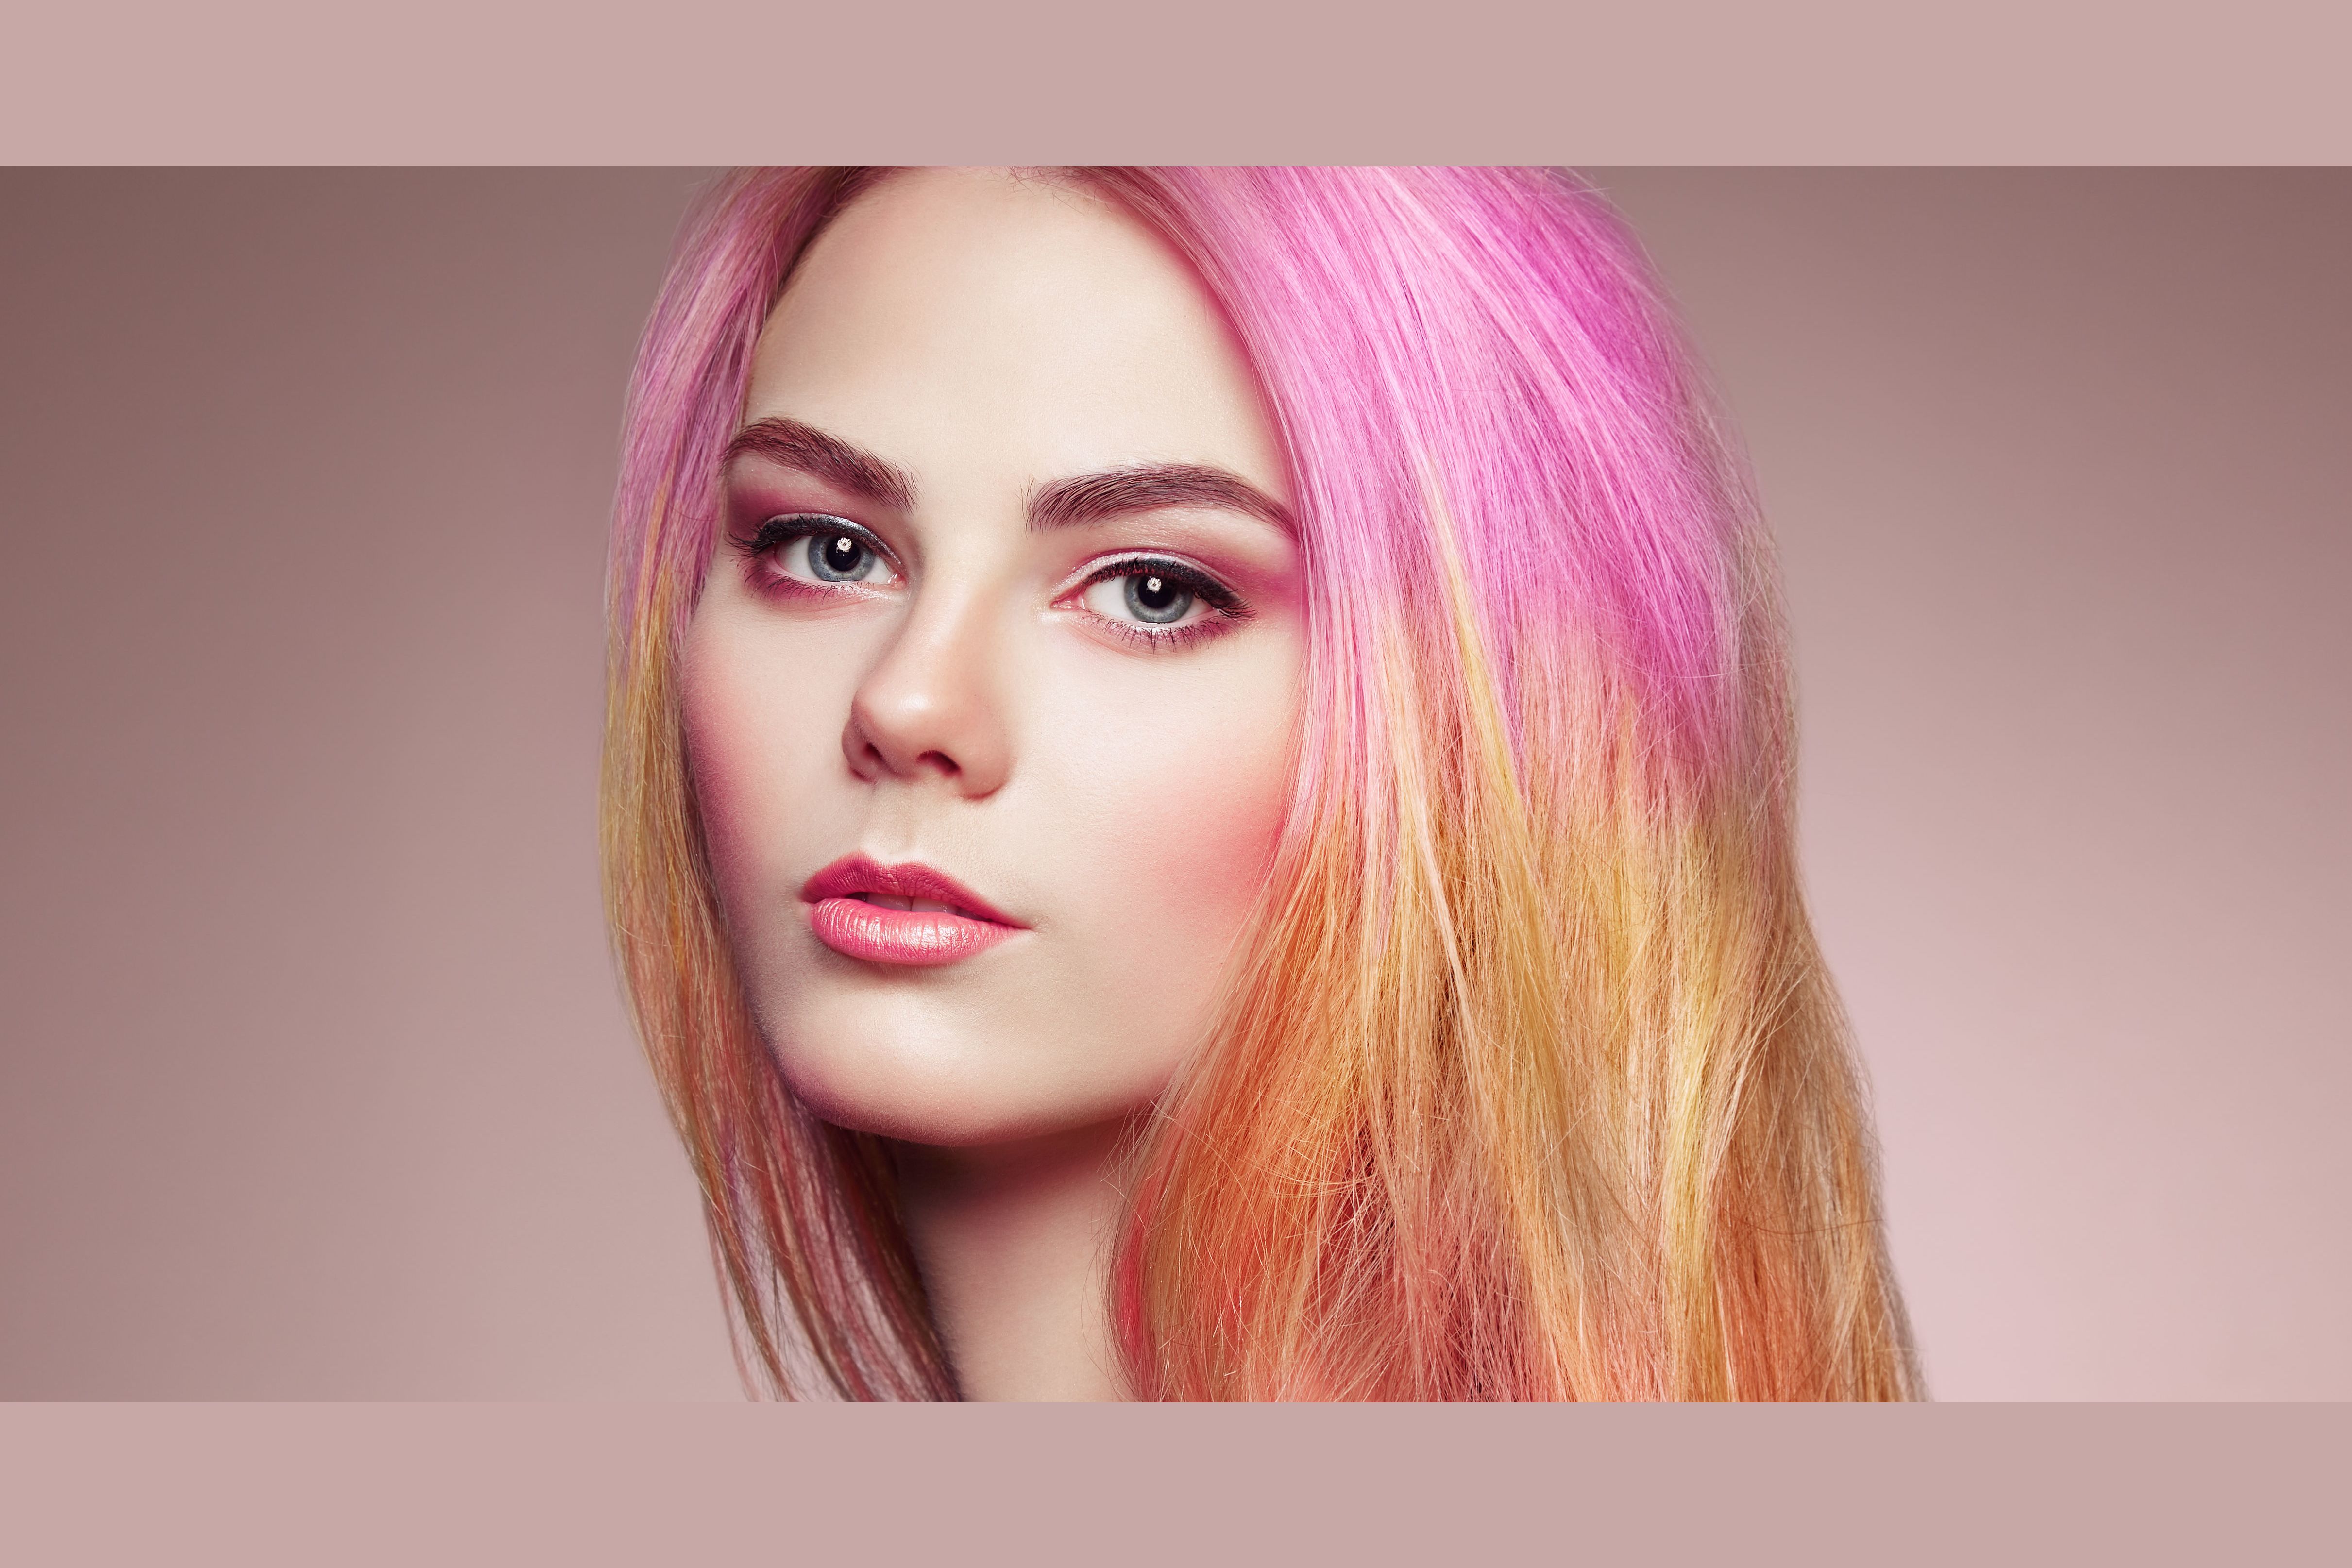 Which Drastic Color Should You Consider Dying Your Hair?